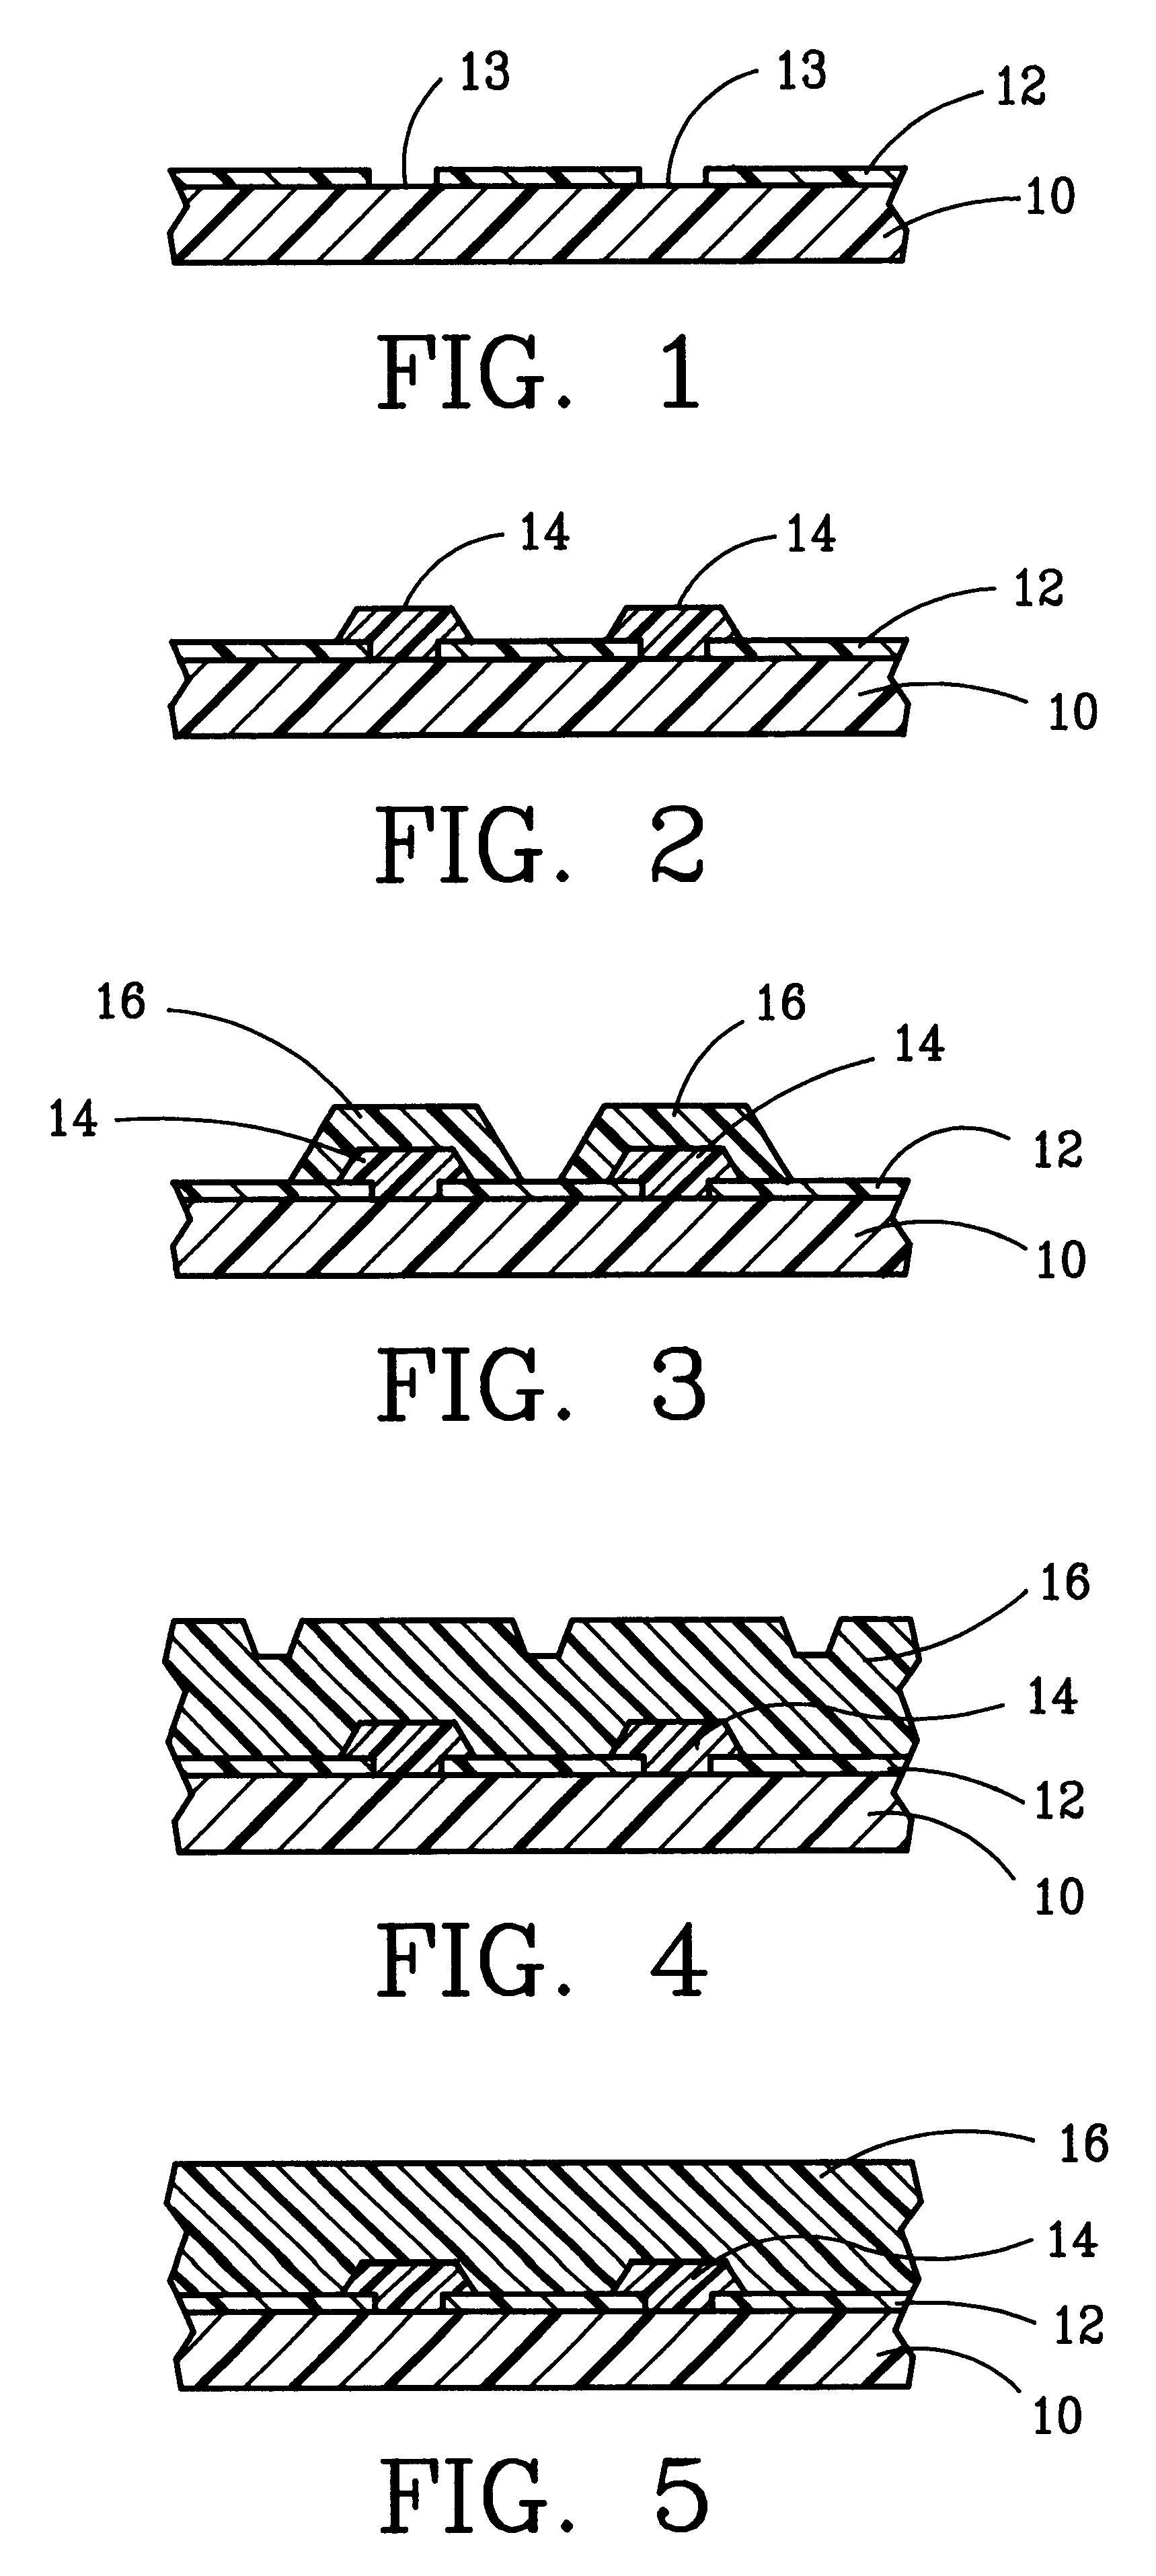 Single step process for epitaxial lateral overgrowth of nitride based materials